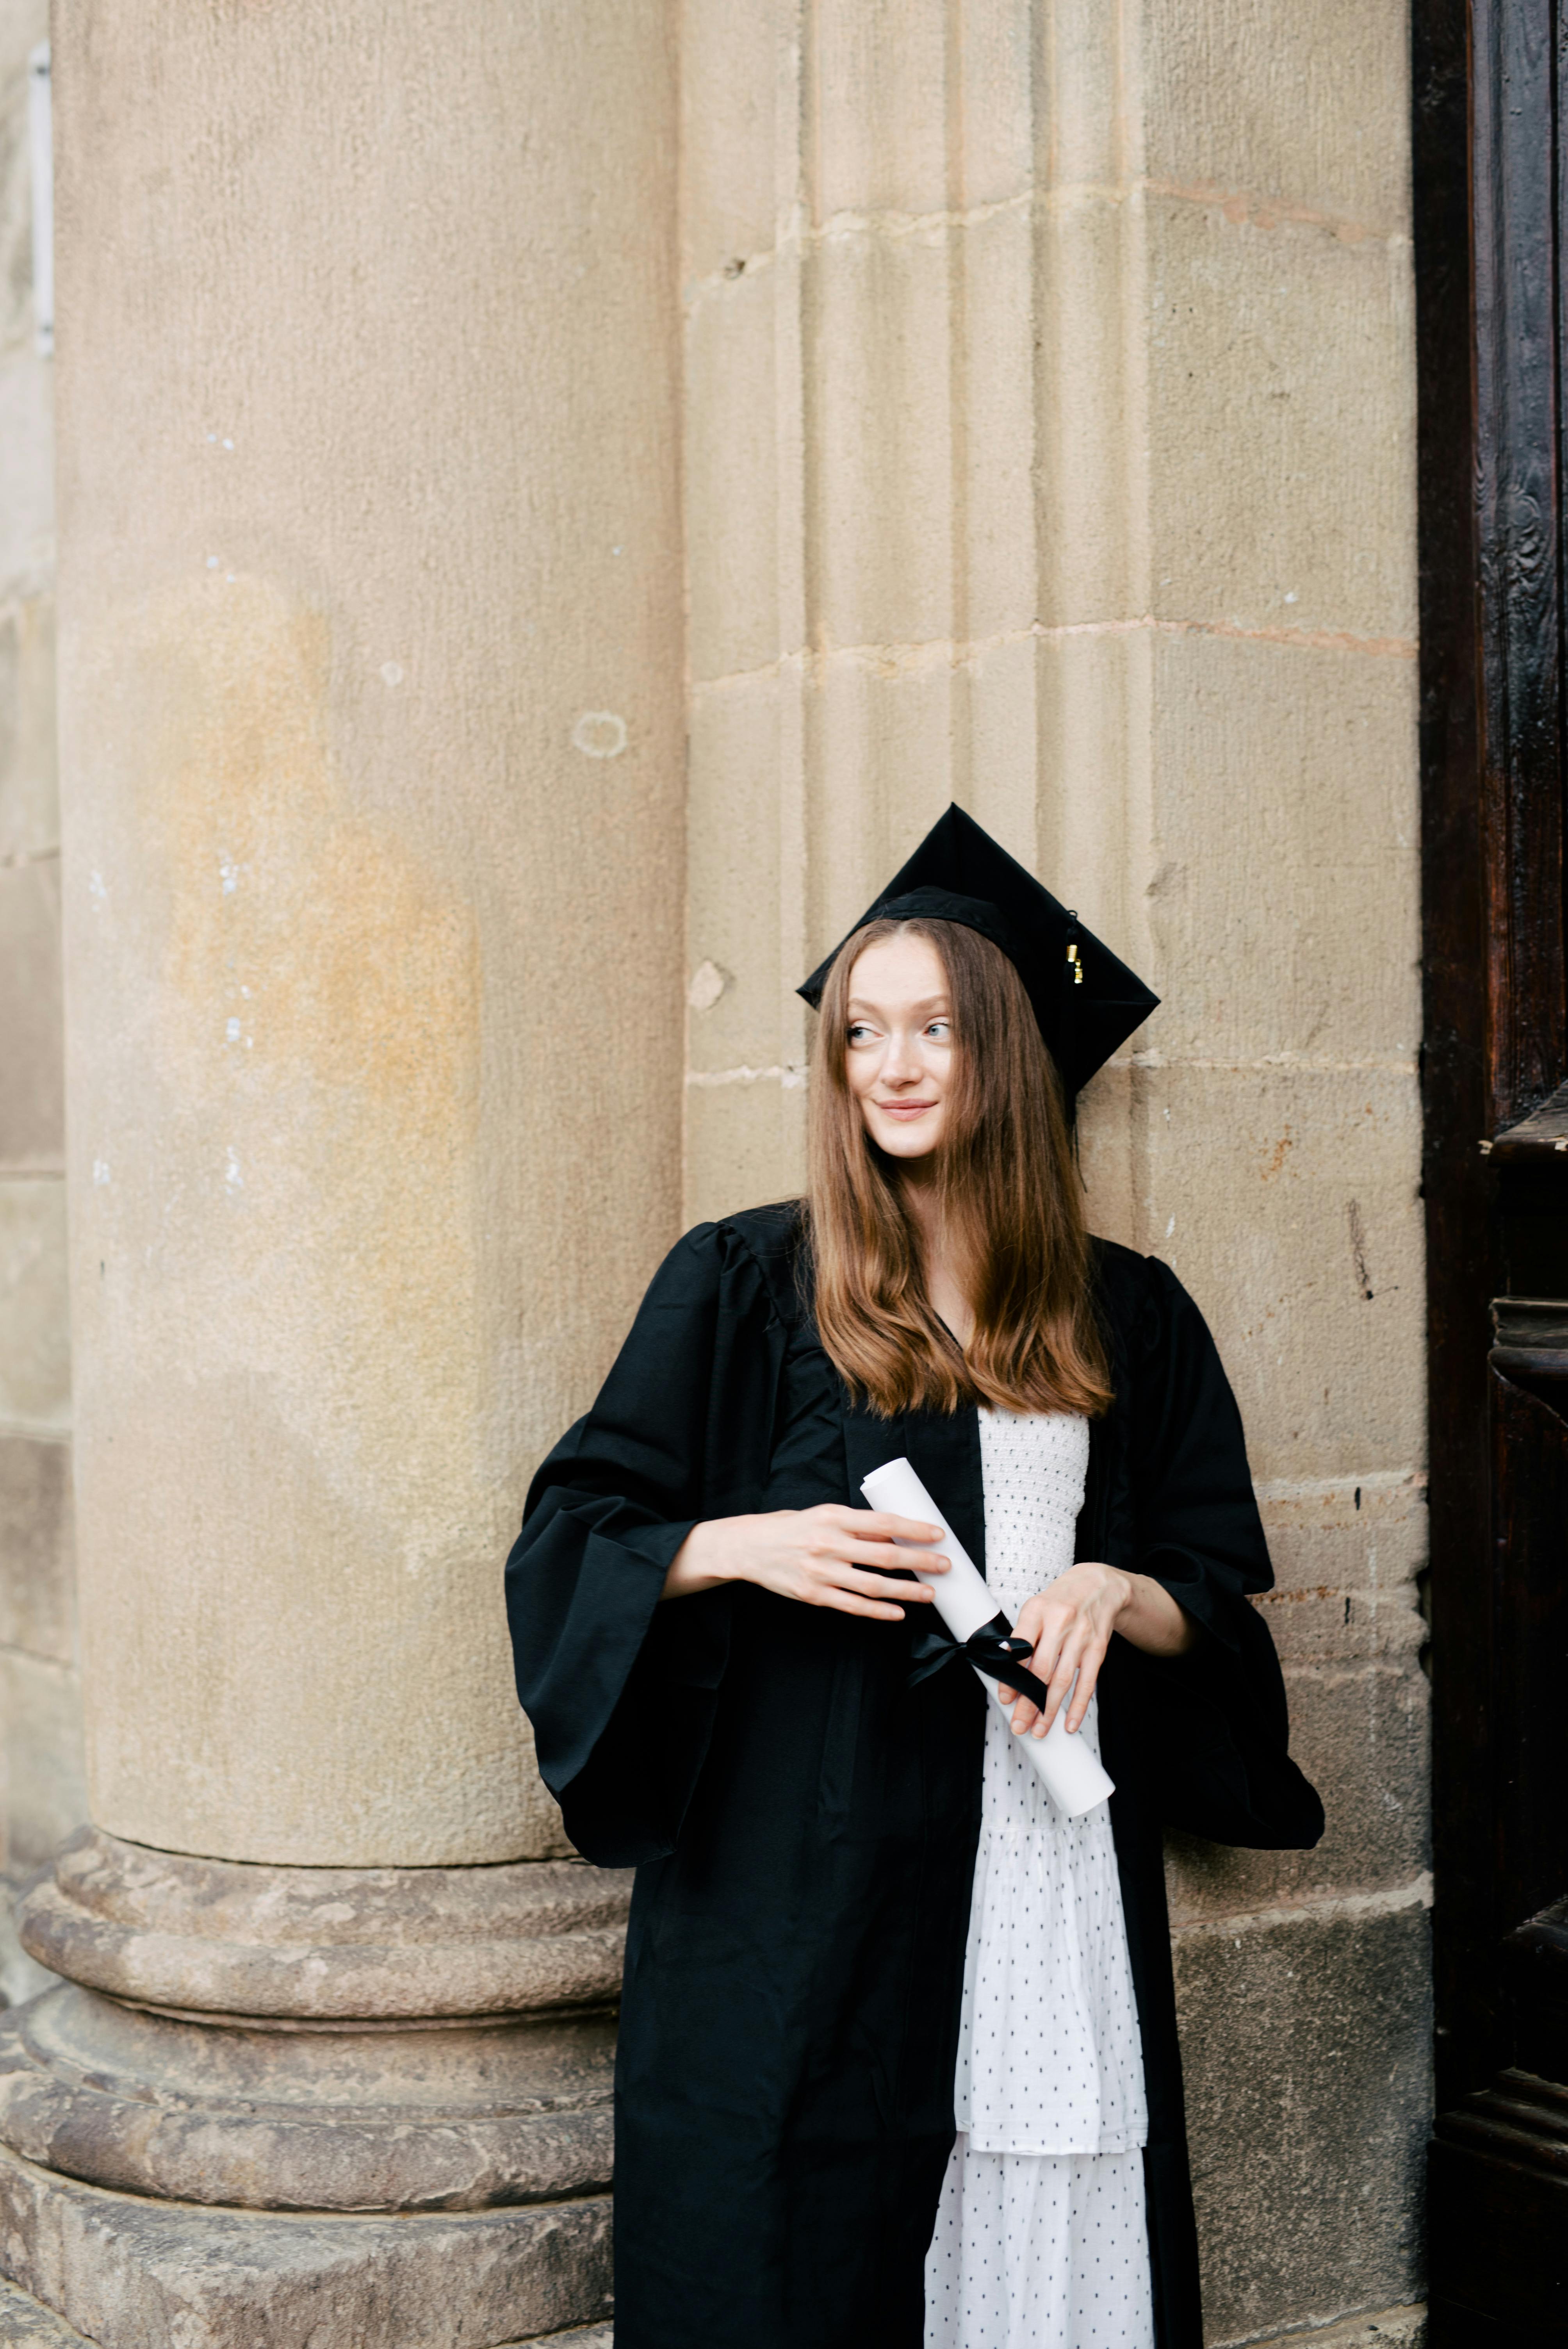 People Wearing Graduation Gowns · Free Stock Photo